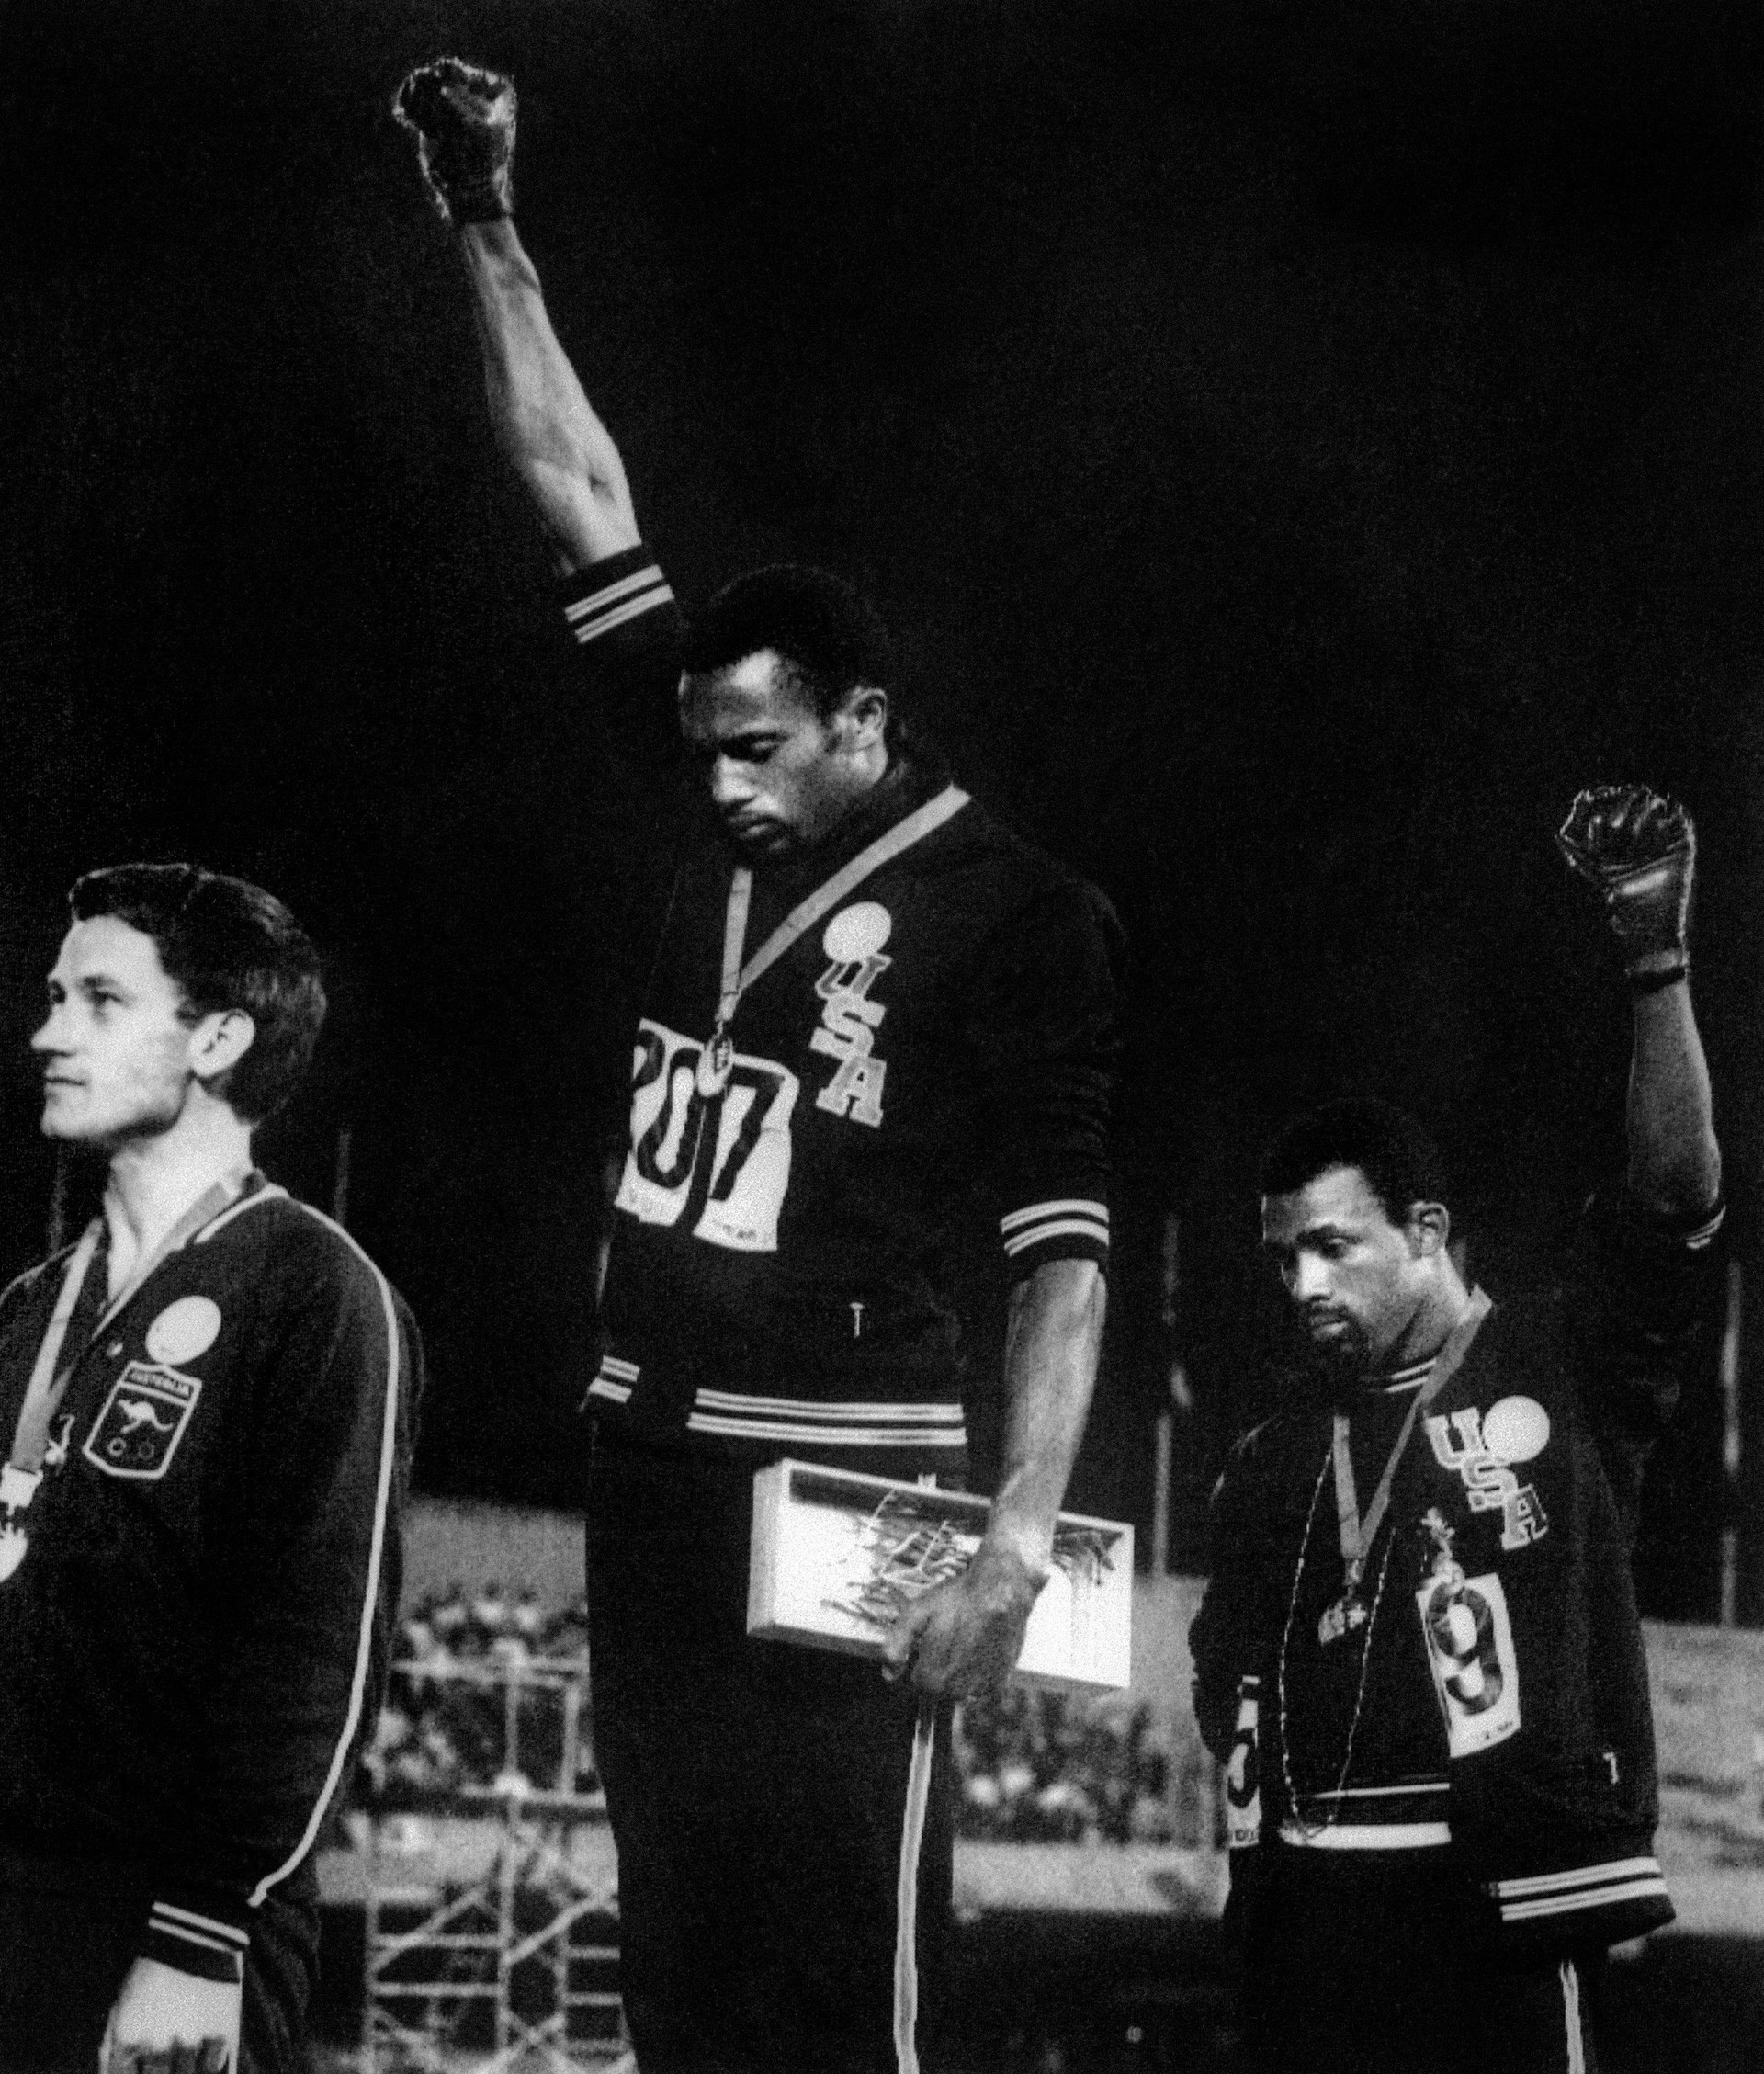 San Jose State University sprinter Tommie Smith, center, and John Carlos, right, raised their gloved fists on the awards podium at the 1968 Olympic Games in Mexico as a protest against racial oppression in America. Peter Norman of Australia, left, who took silver, wore an Olympic Project for Human Rights pin in solidarity.